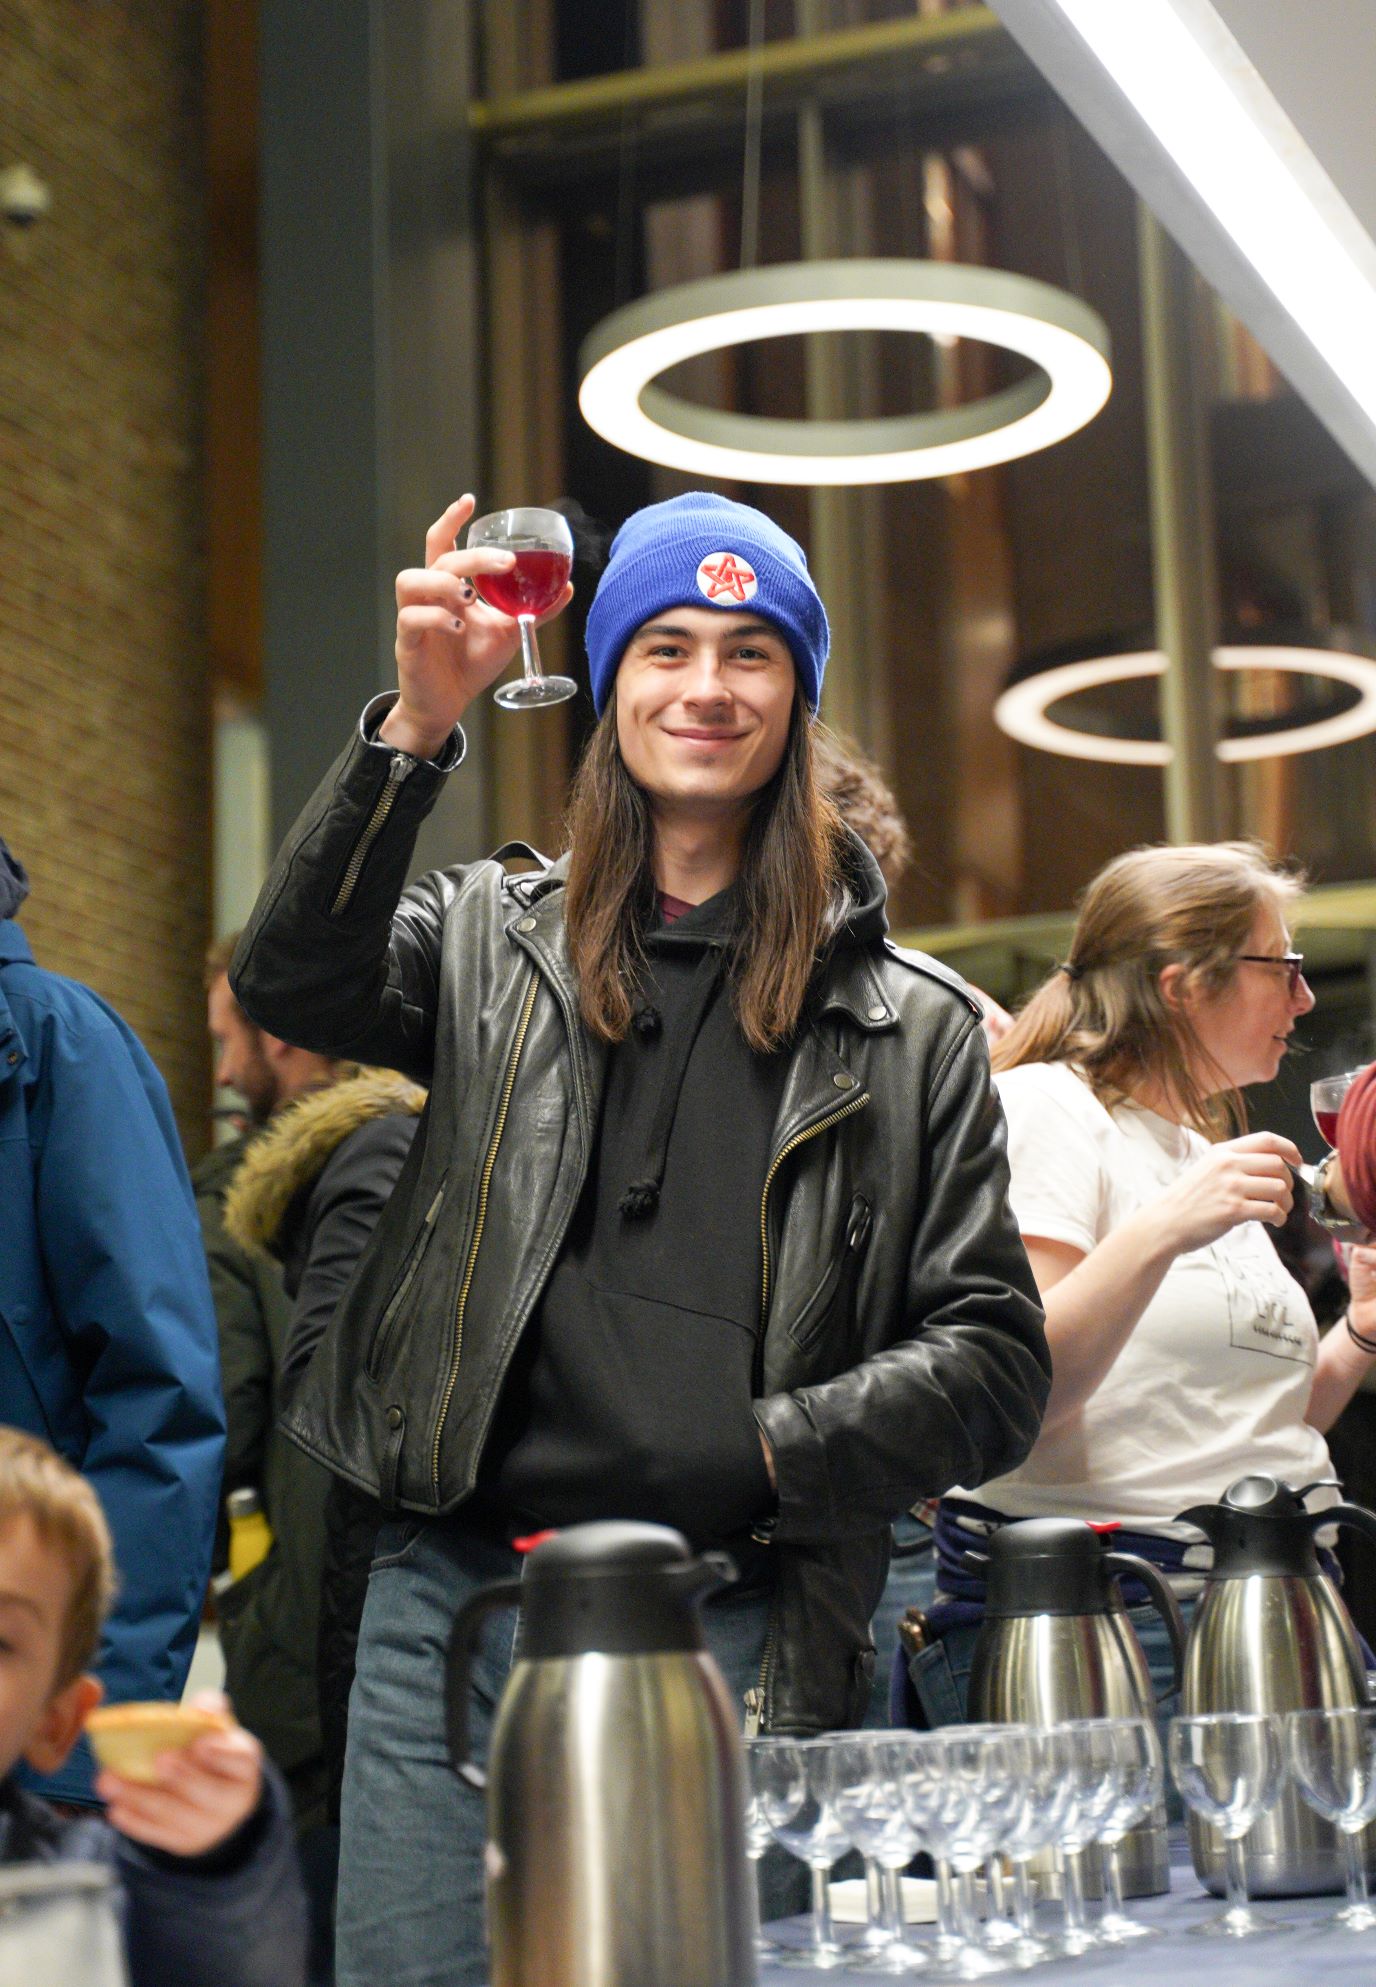 young man with long hair and woolly hat raising his glass and smiling at the camera